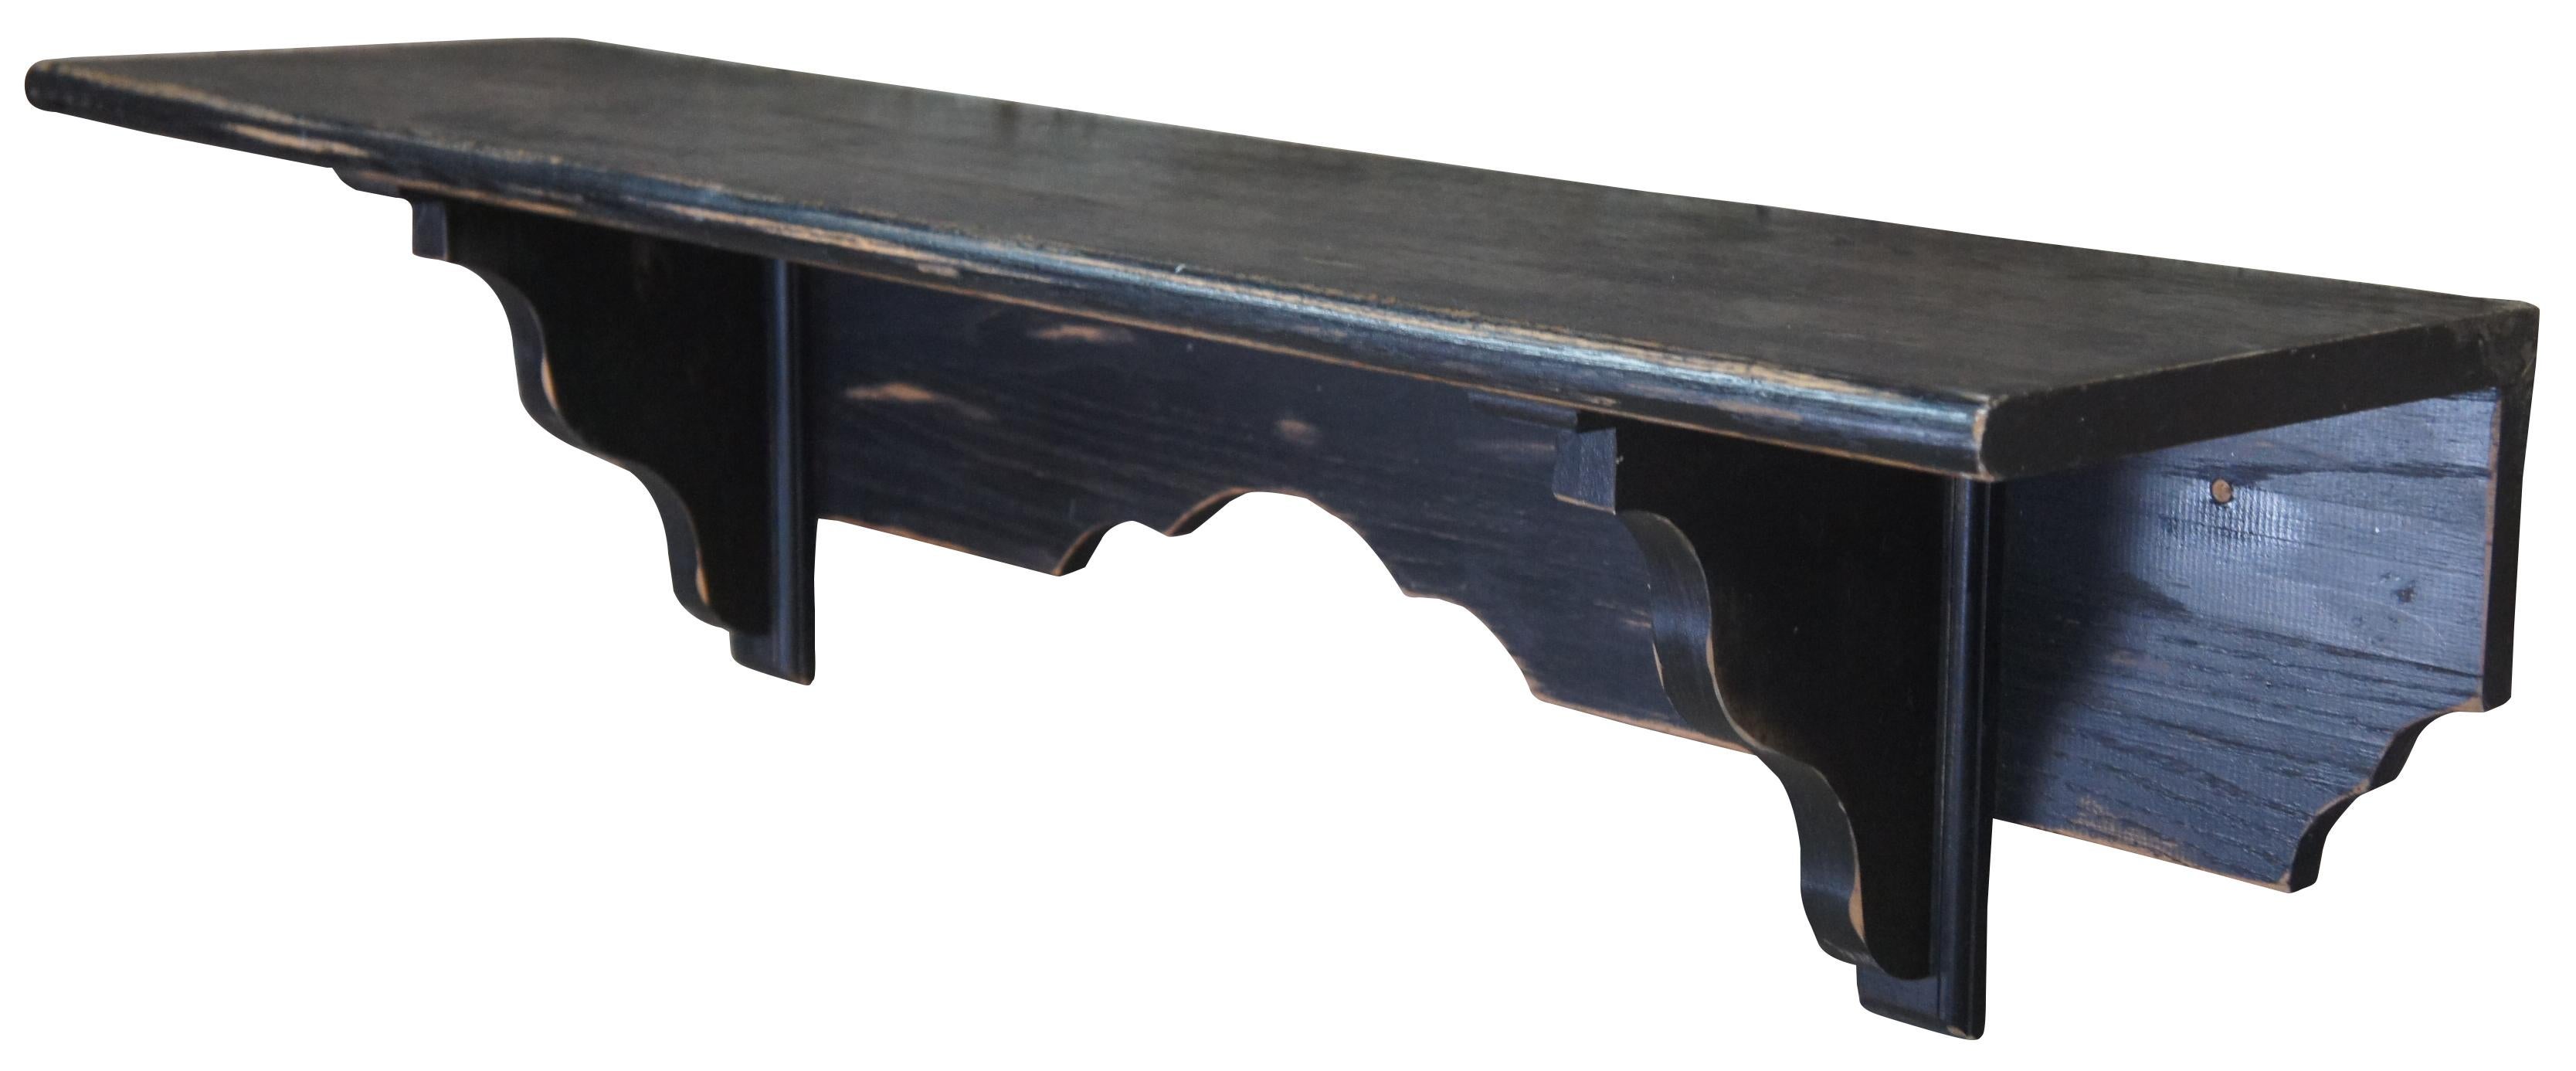 Late 20th century black washed oak wall shelf. French country or farmhous style. Great for storage or display. Hooks can be added to make it a hall tree. Measure: 48